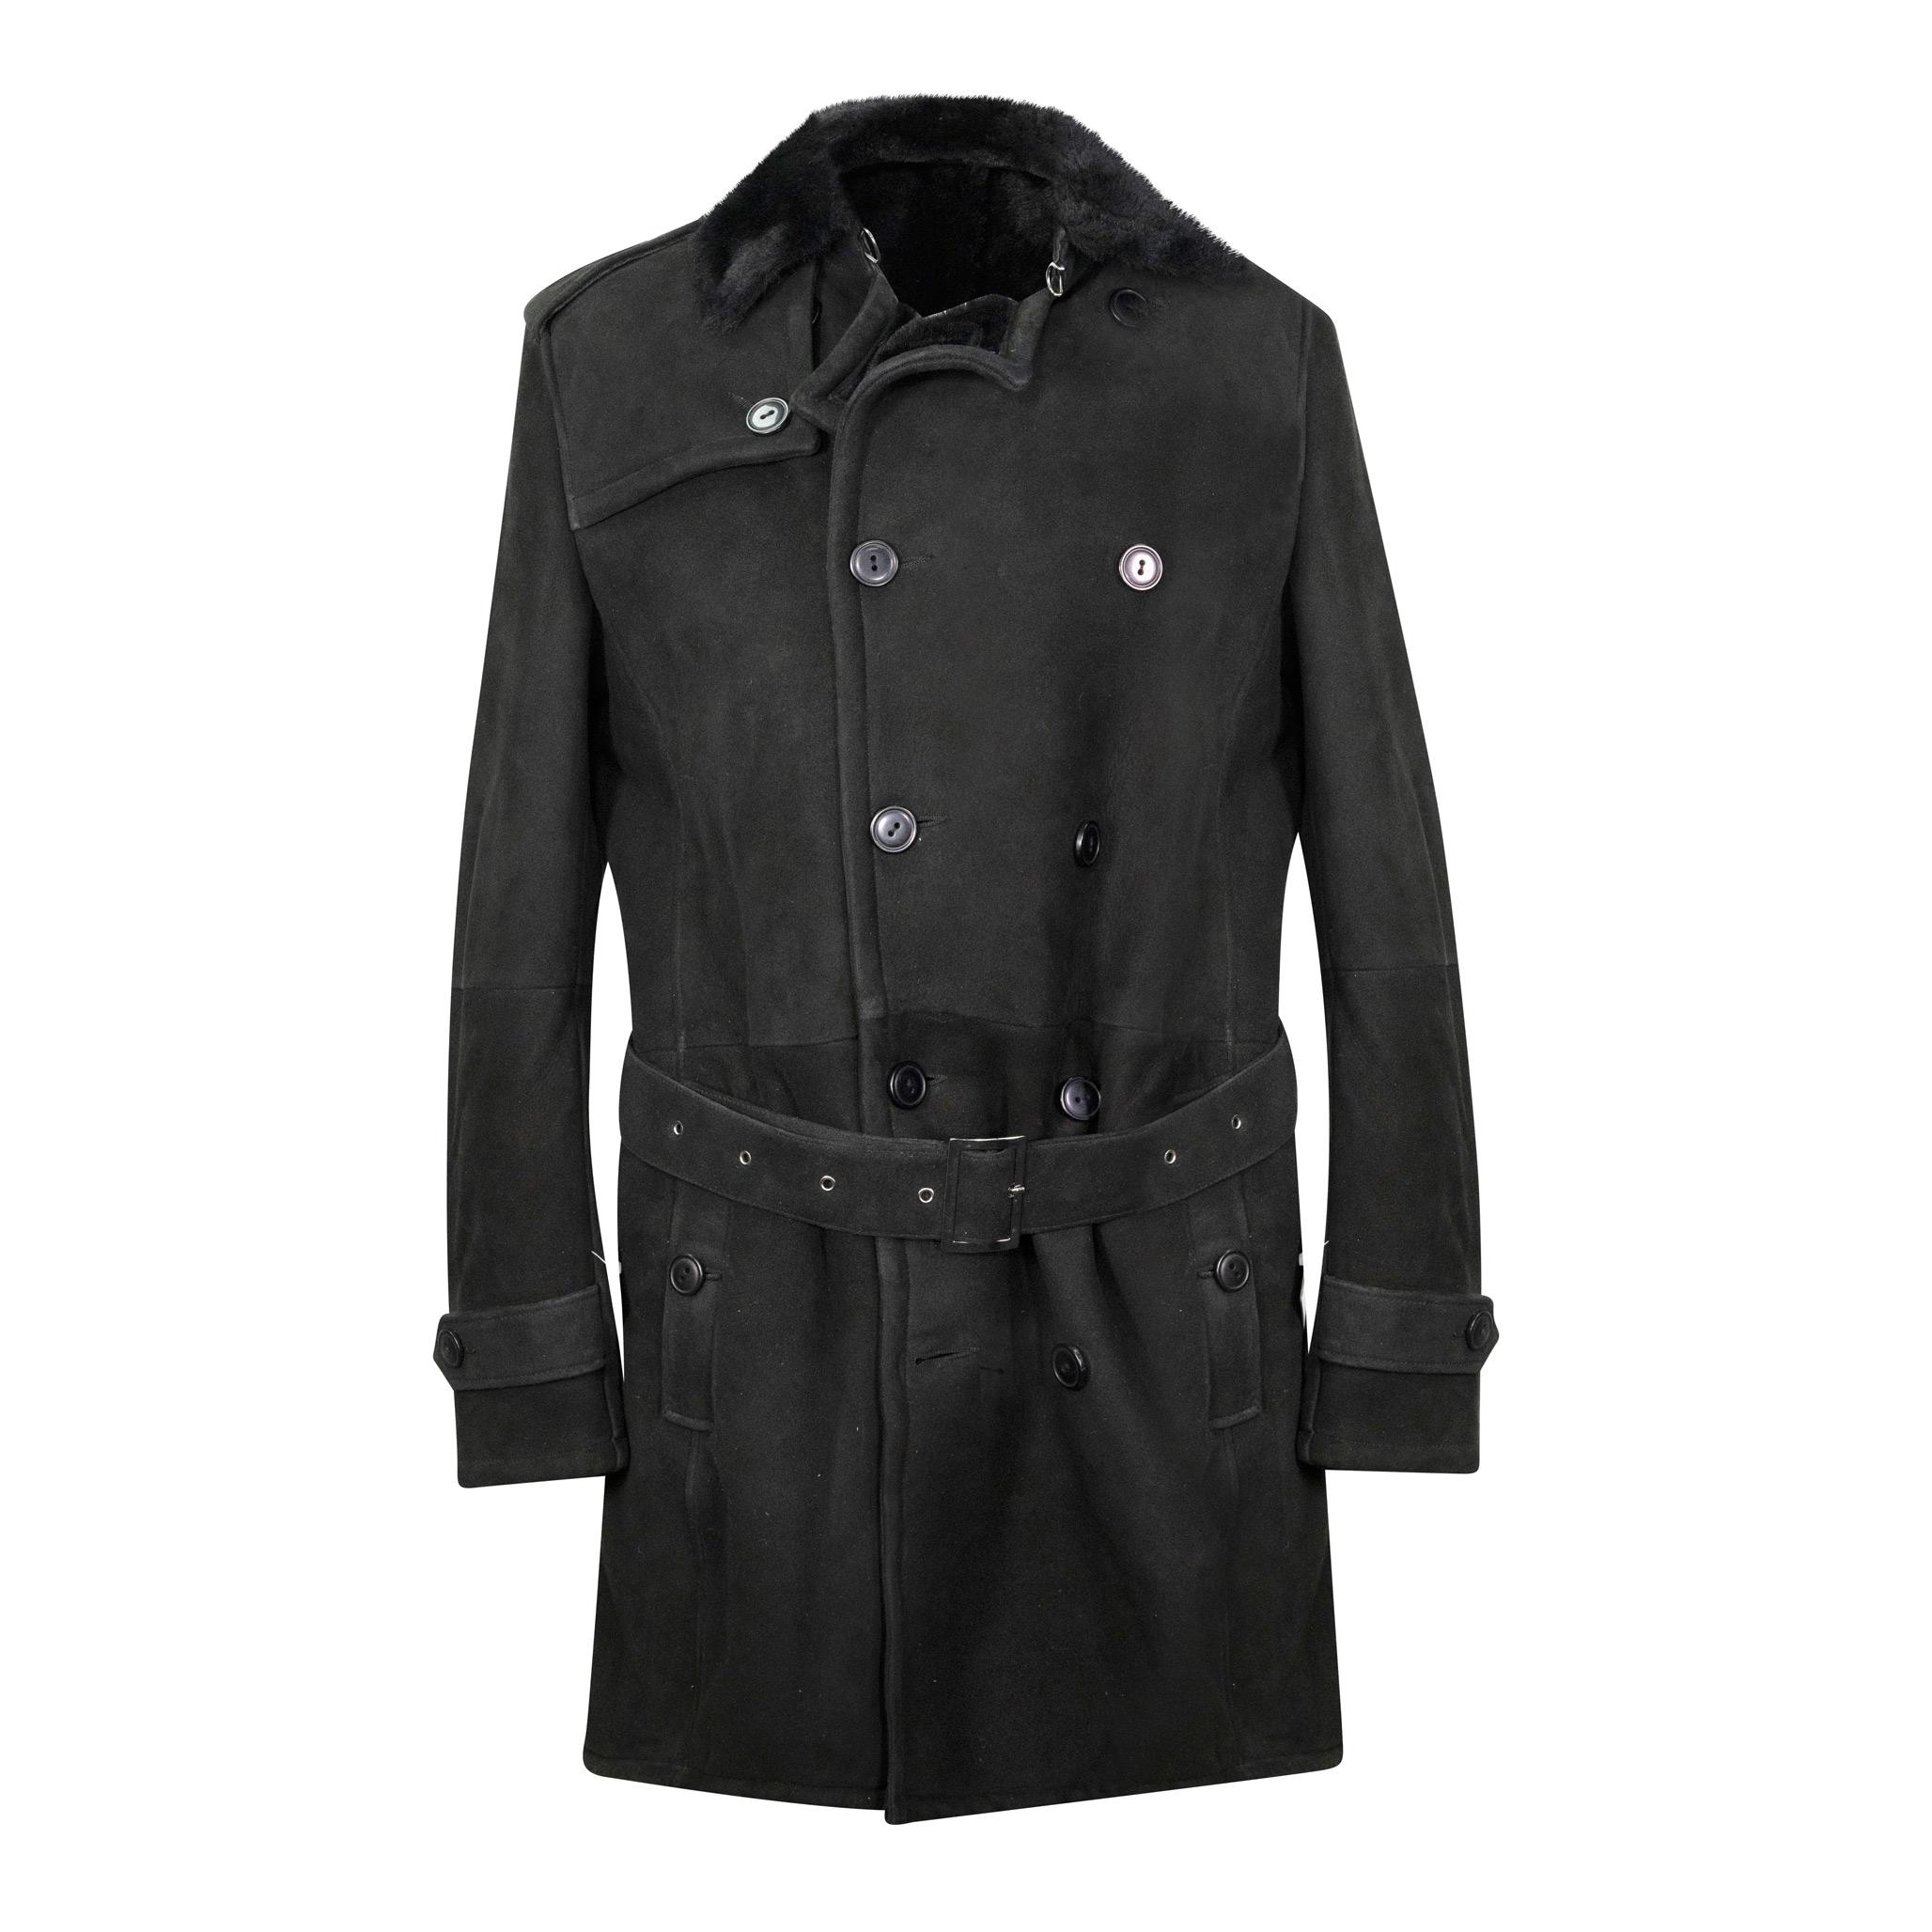 A long black luxury sheepskin coat with a soft suede finish. Both belted and buttoned front fastening.